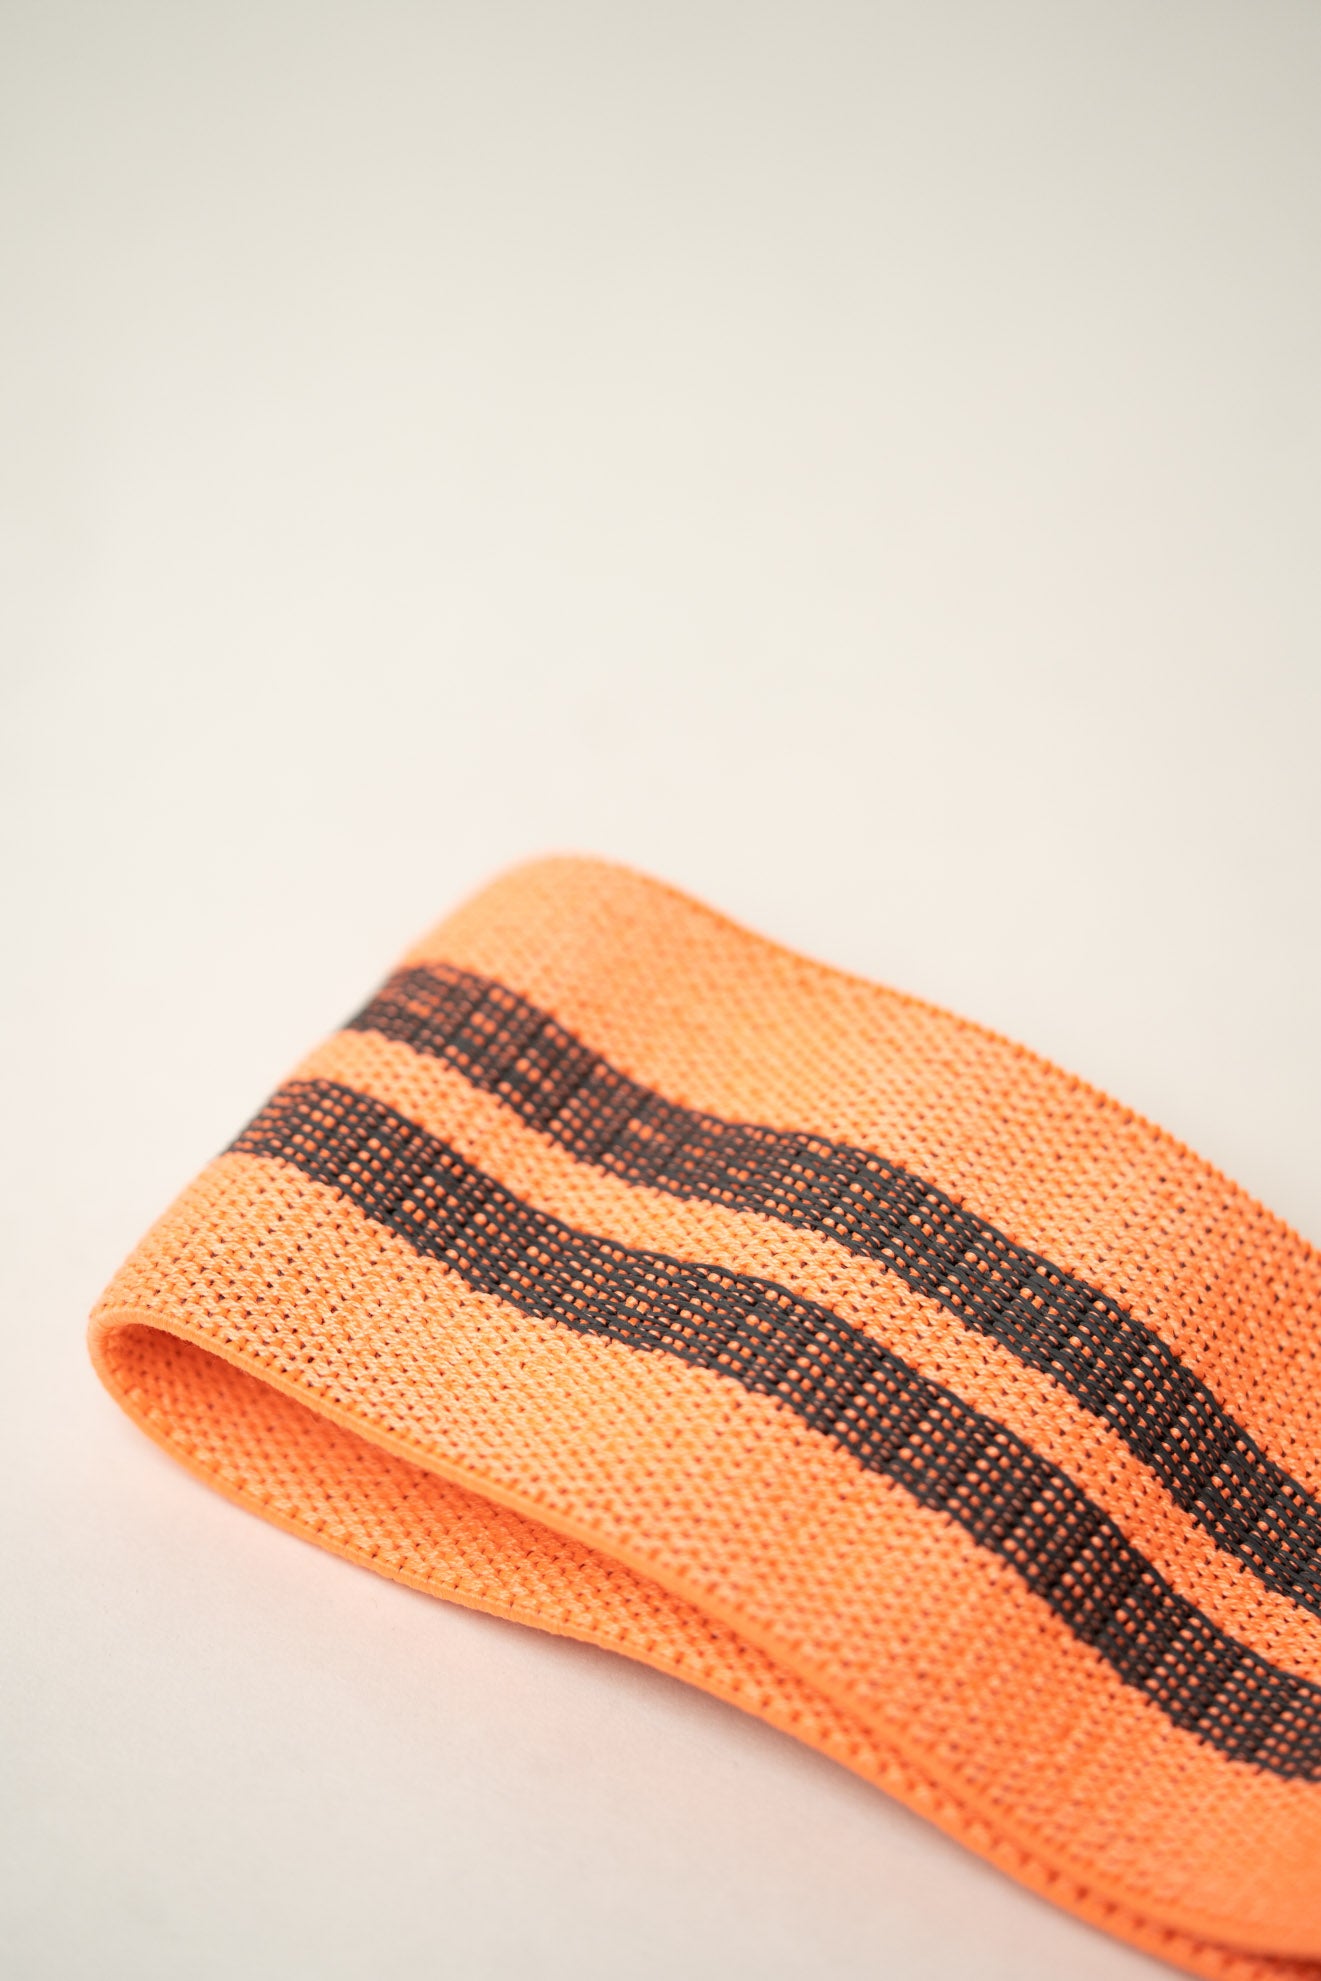 inside of uppper hip resistance band peach